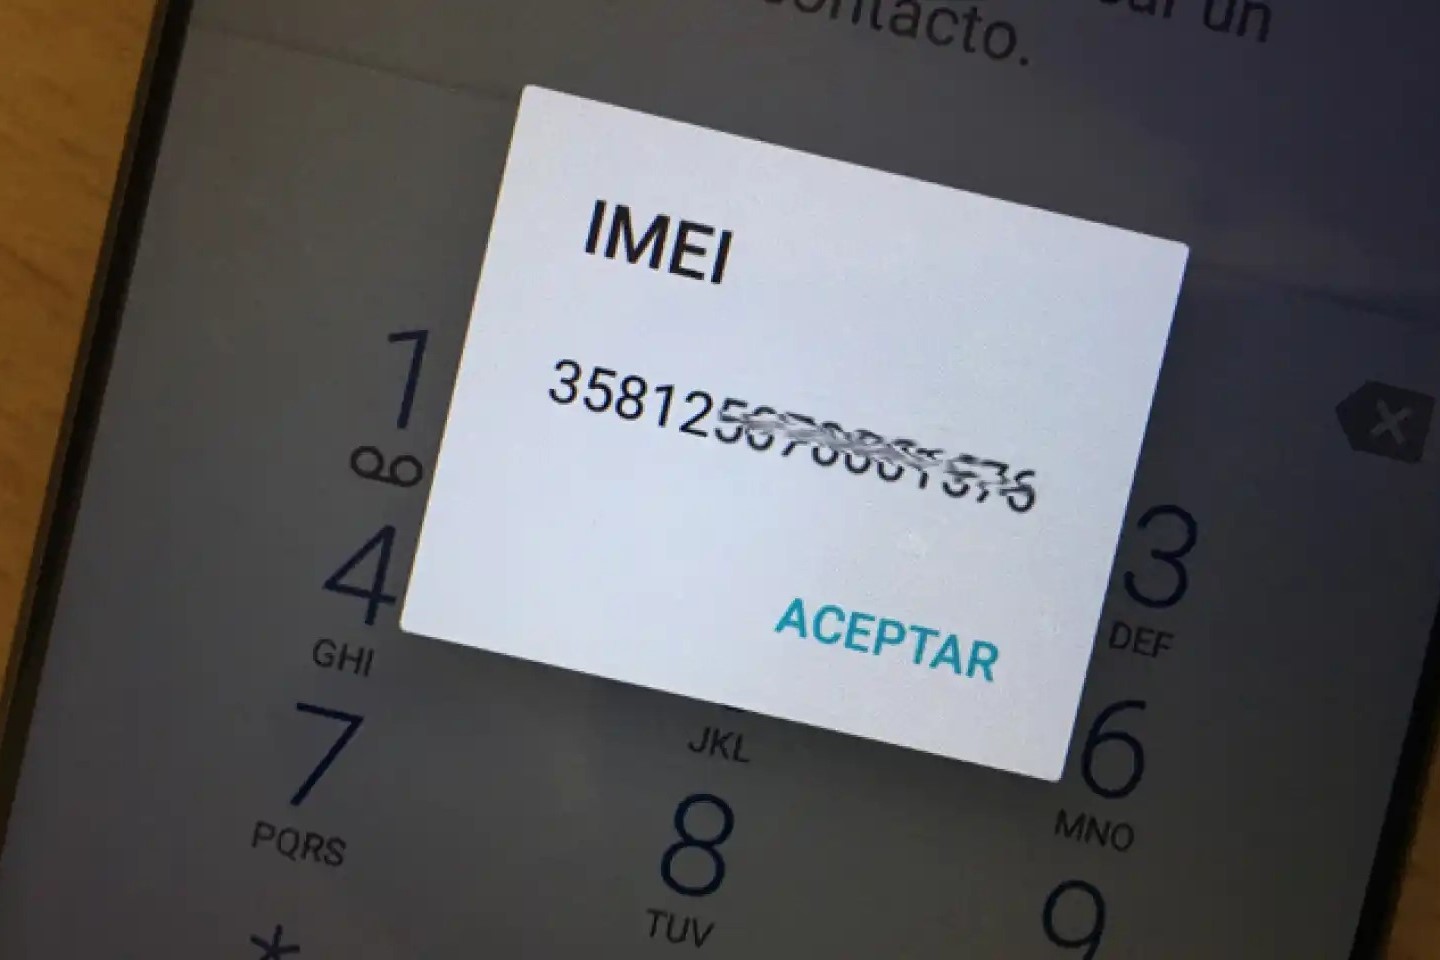 identifying-activated-sim-cards-through-imei-number-explained